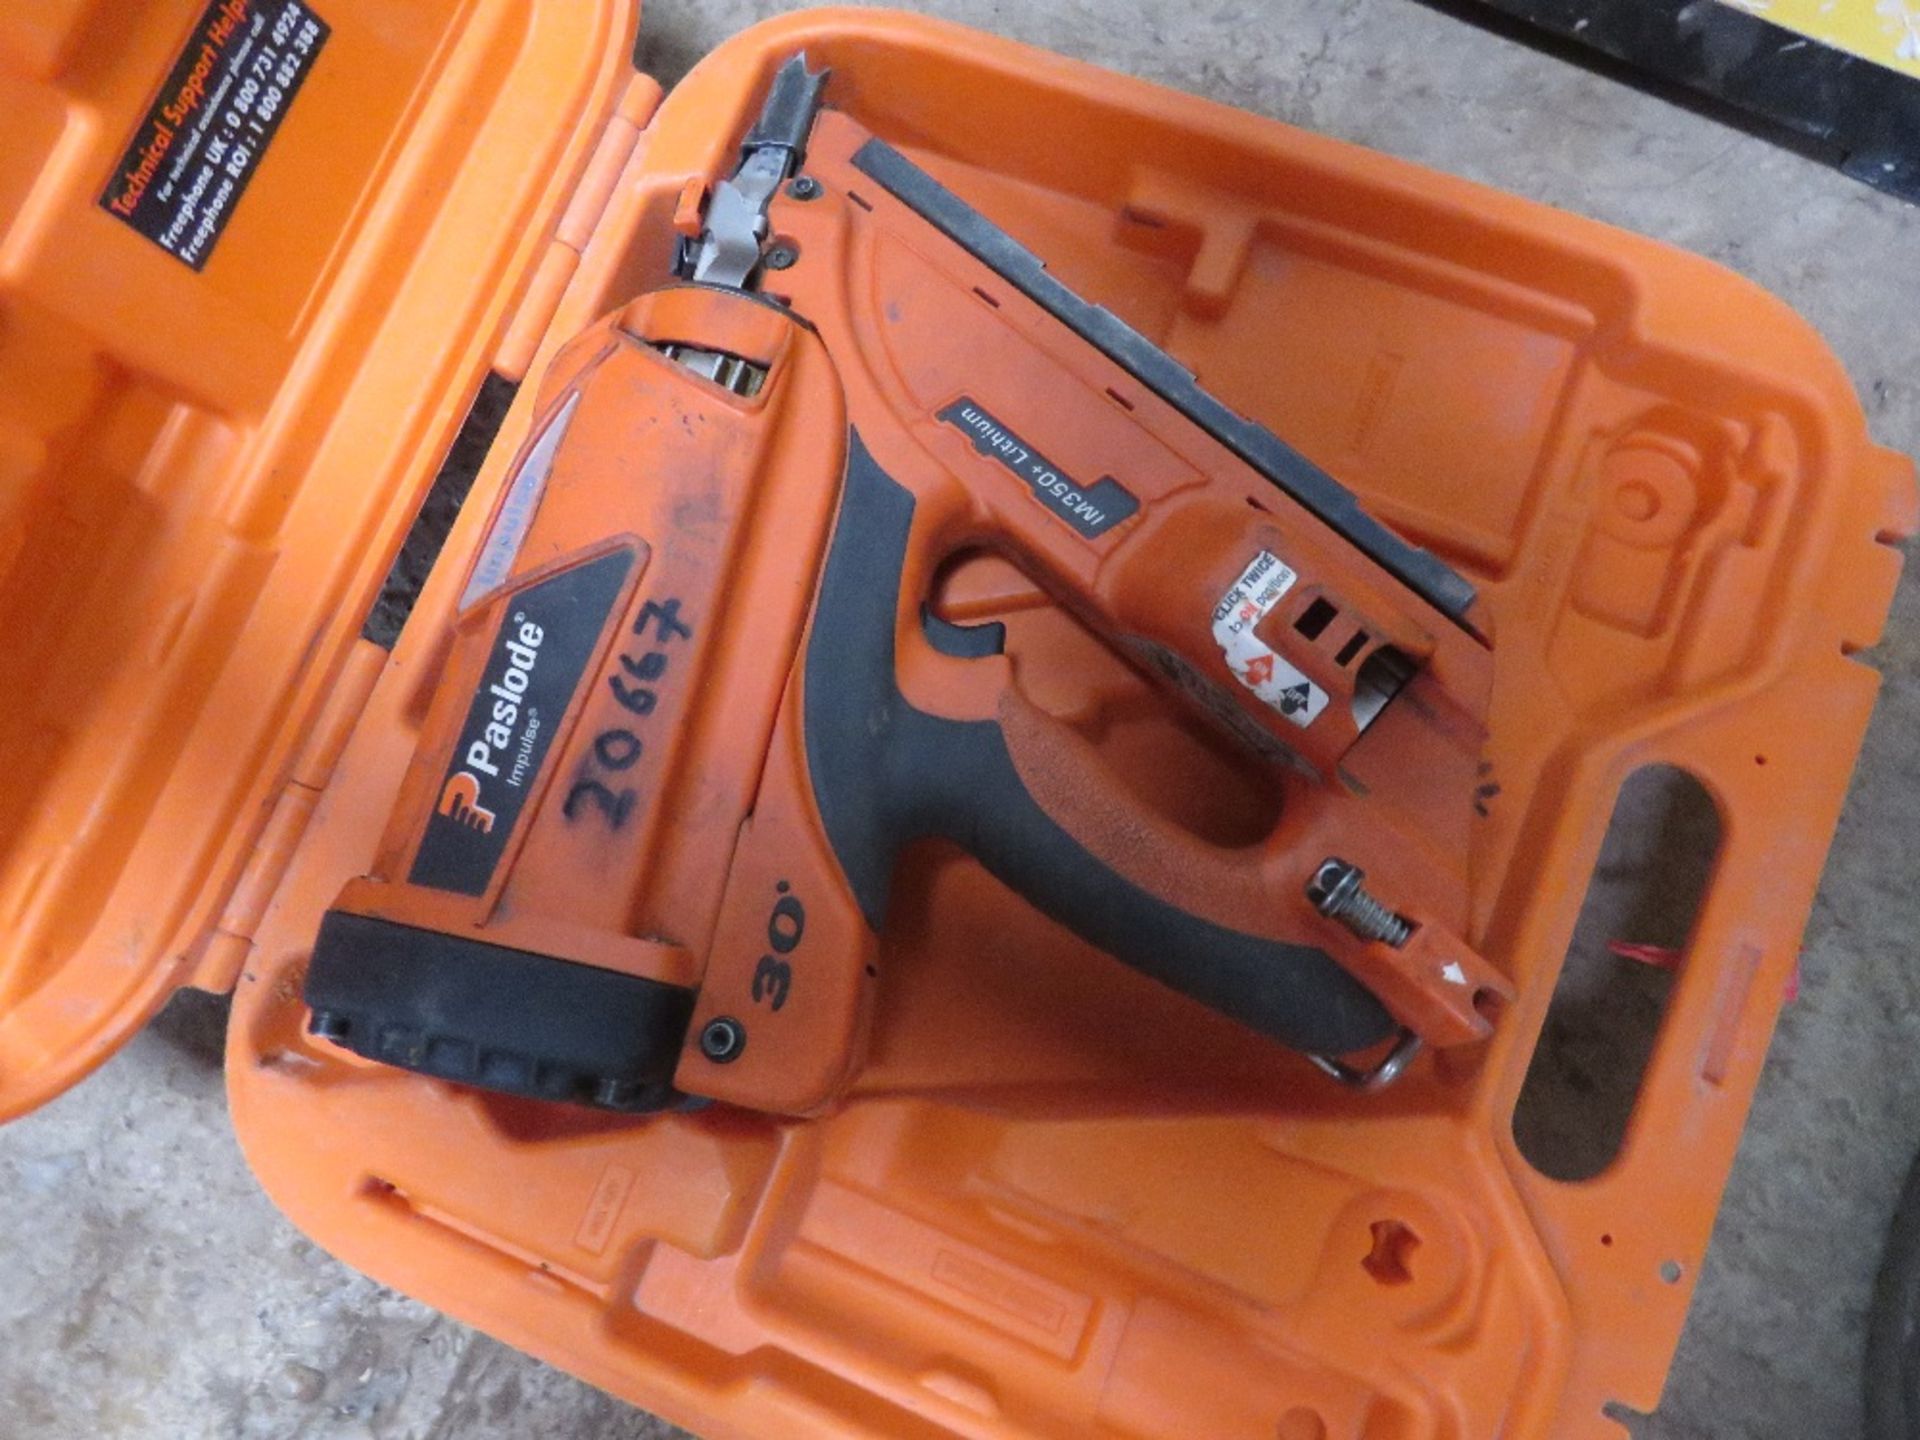 PASLODE NAIL GUN IN A CASE, NO CHARGER OR BATTERY. - Image 3 of 3